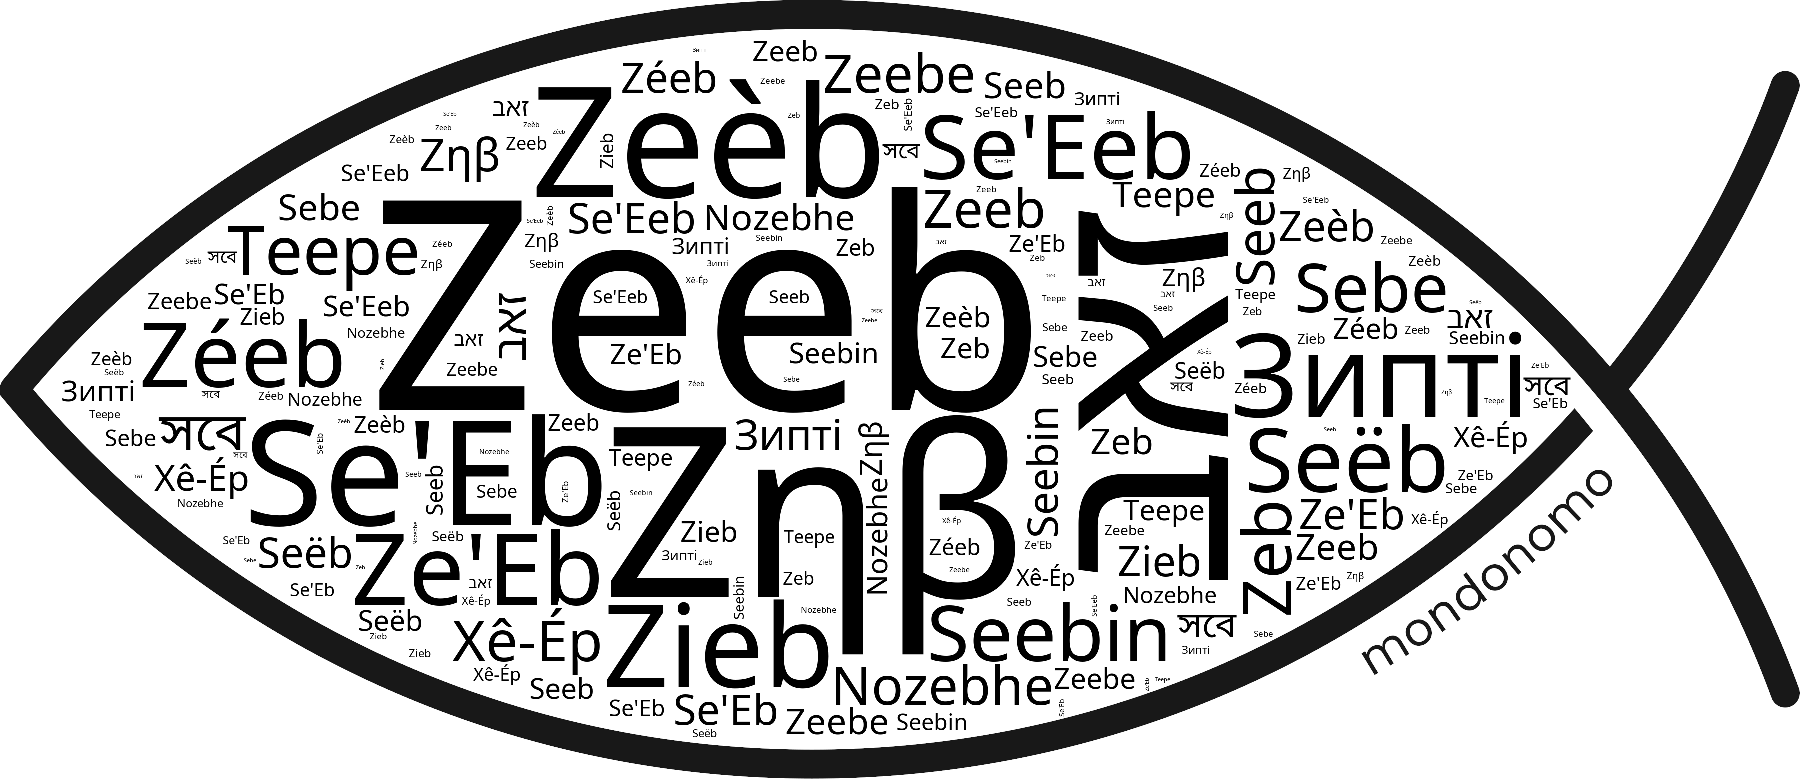 Name Zeeb in the world's Bibles